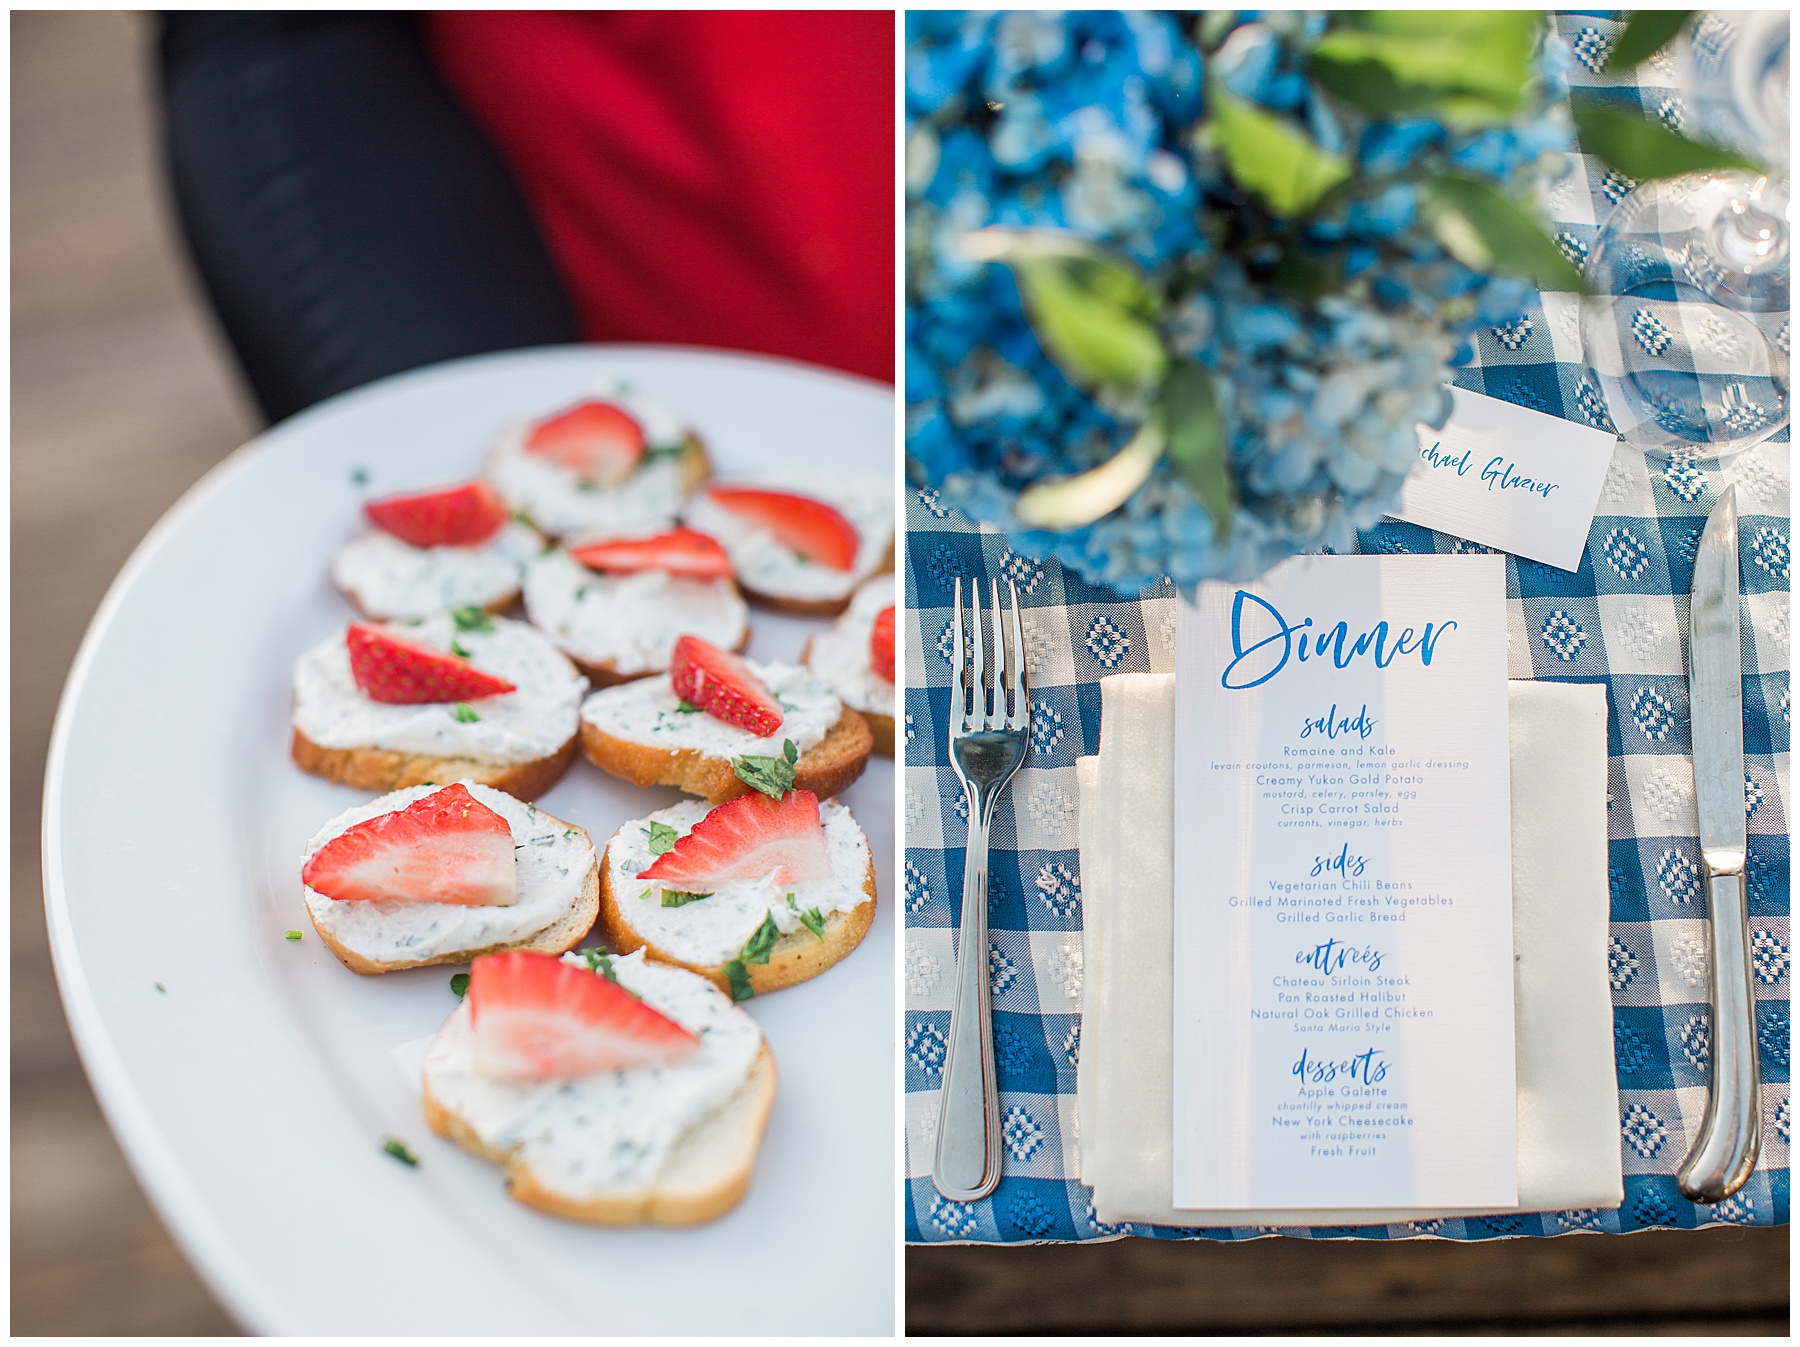 strawberry crostini and dinner menus on the table